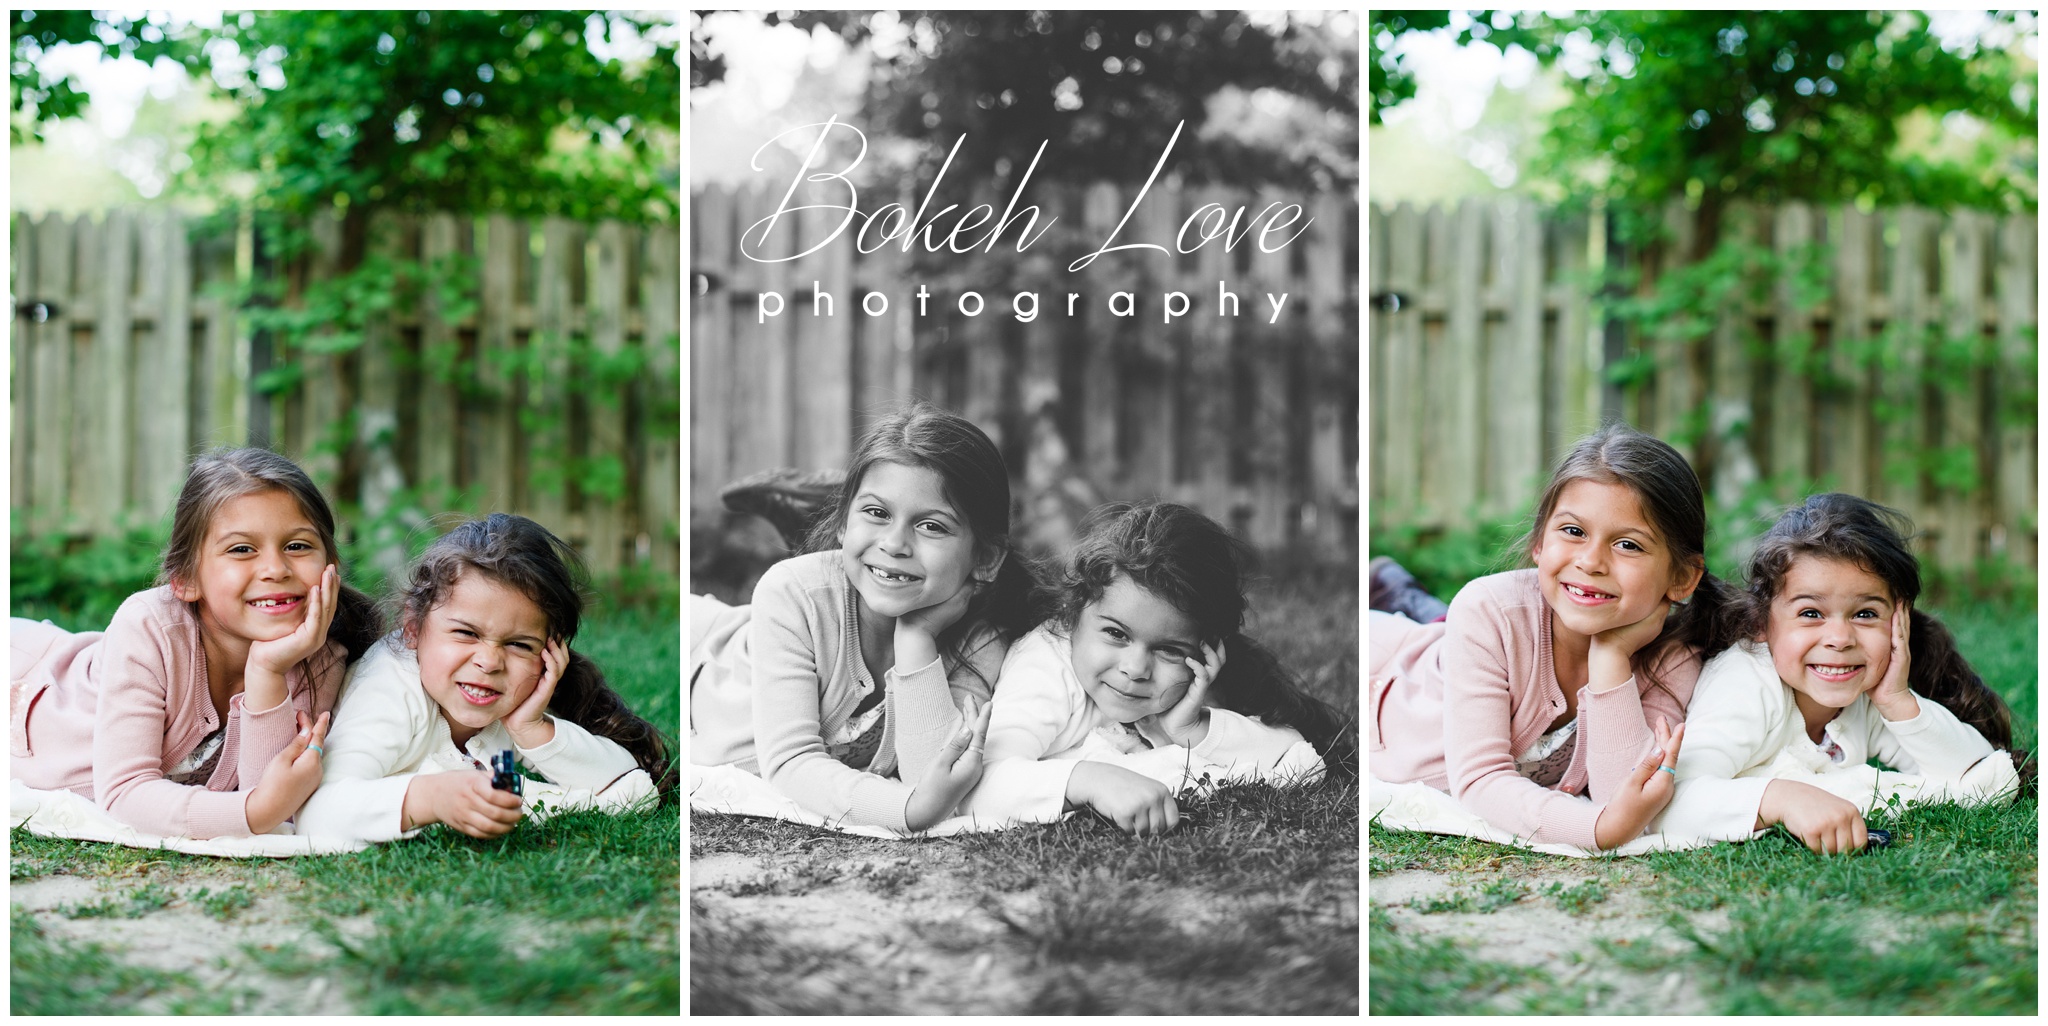 Bokeh Love Photography, Portrait session in Galloway